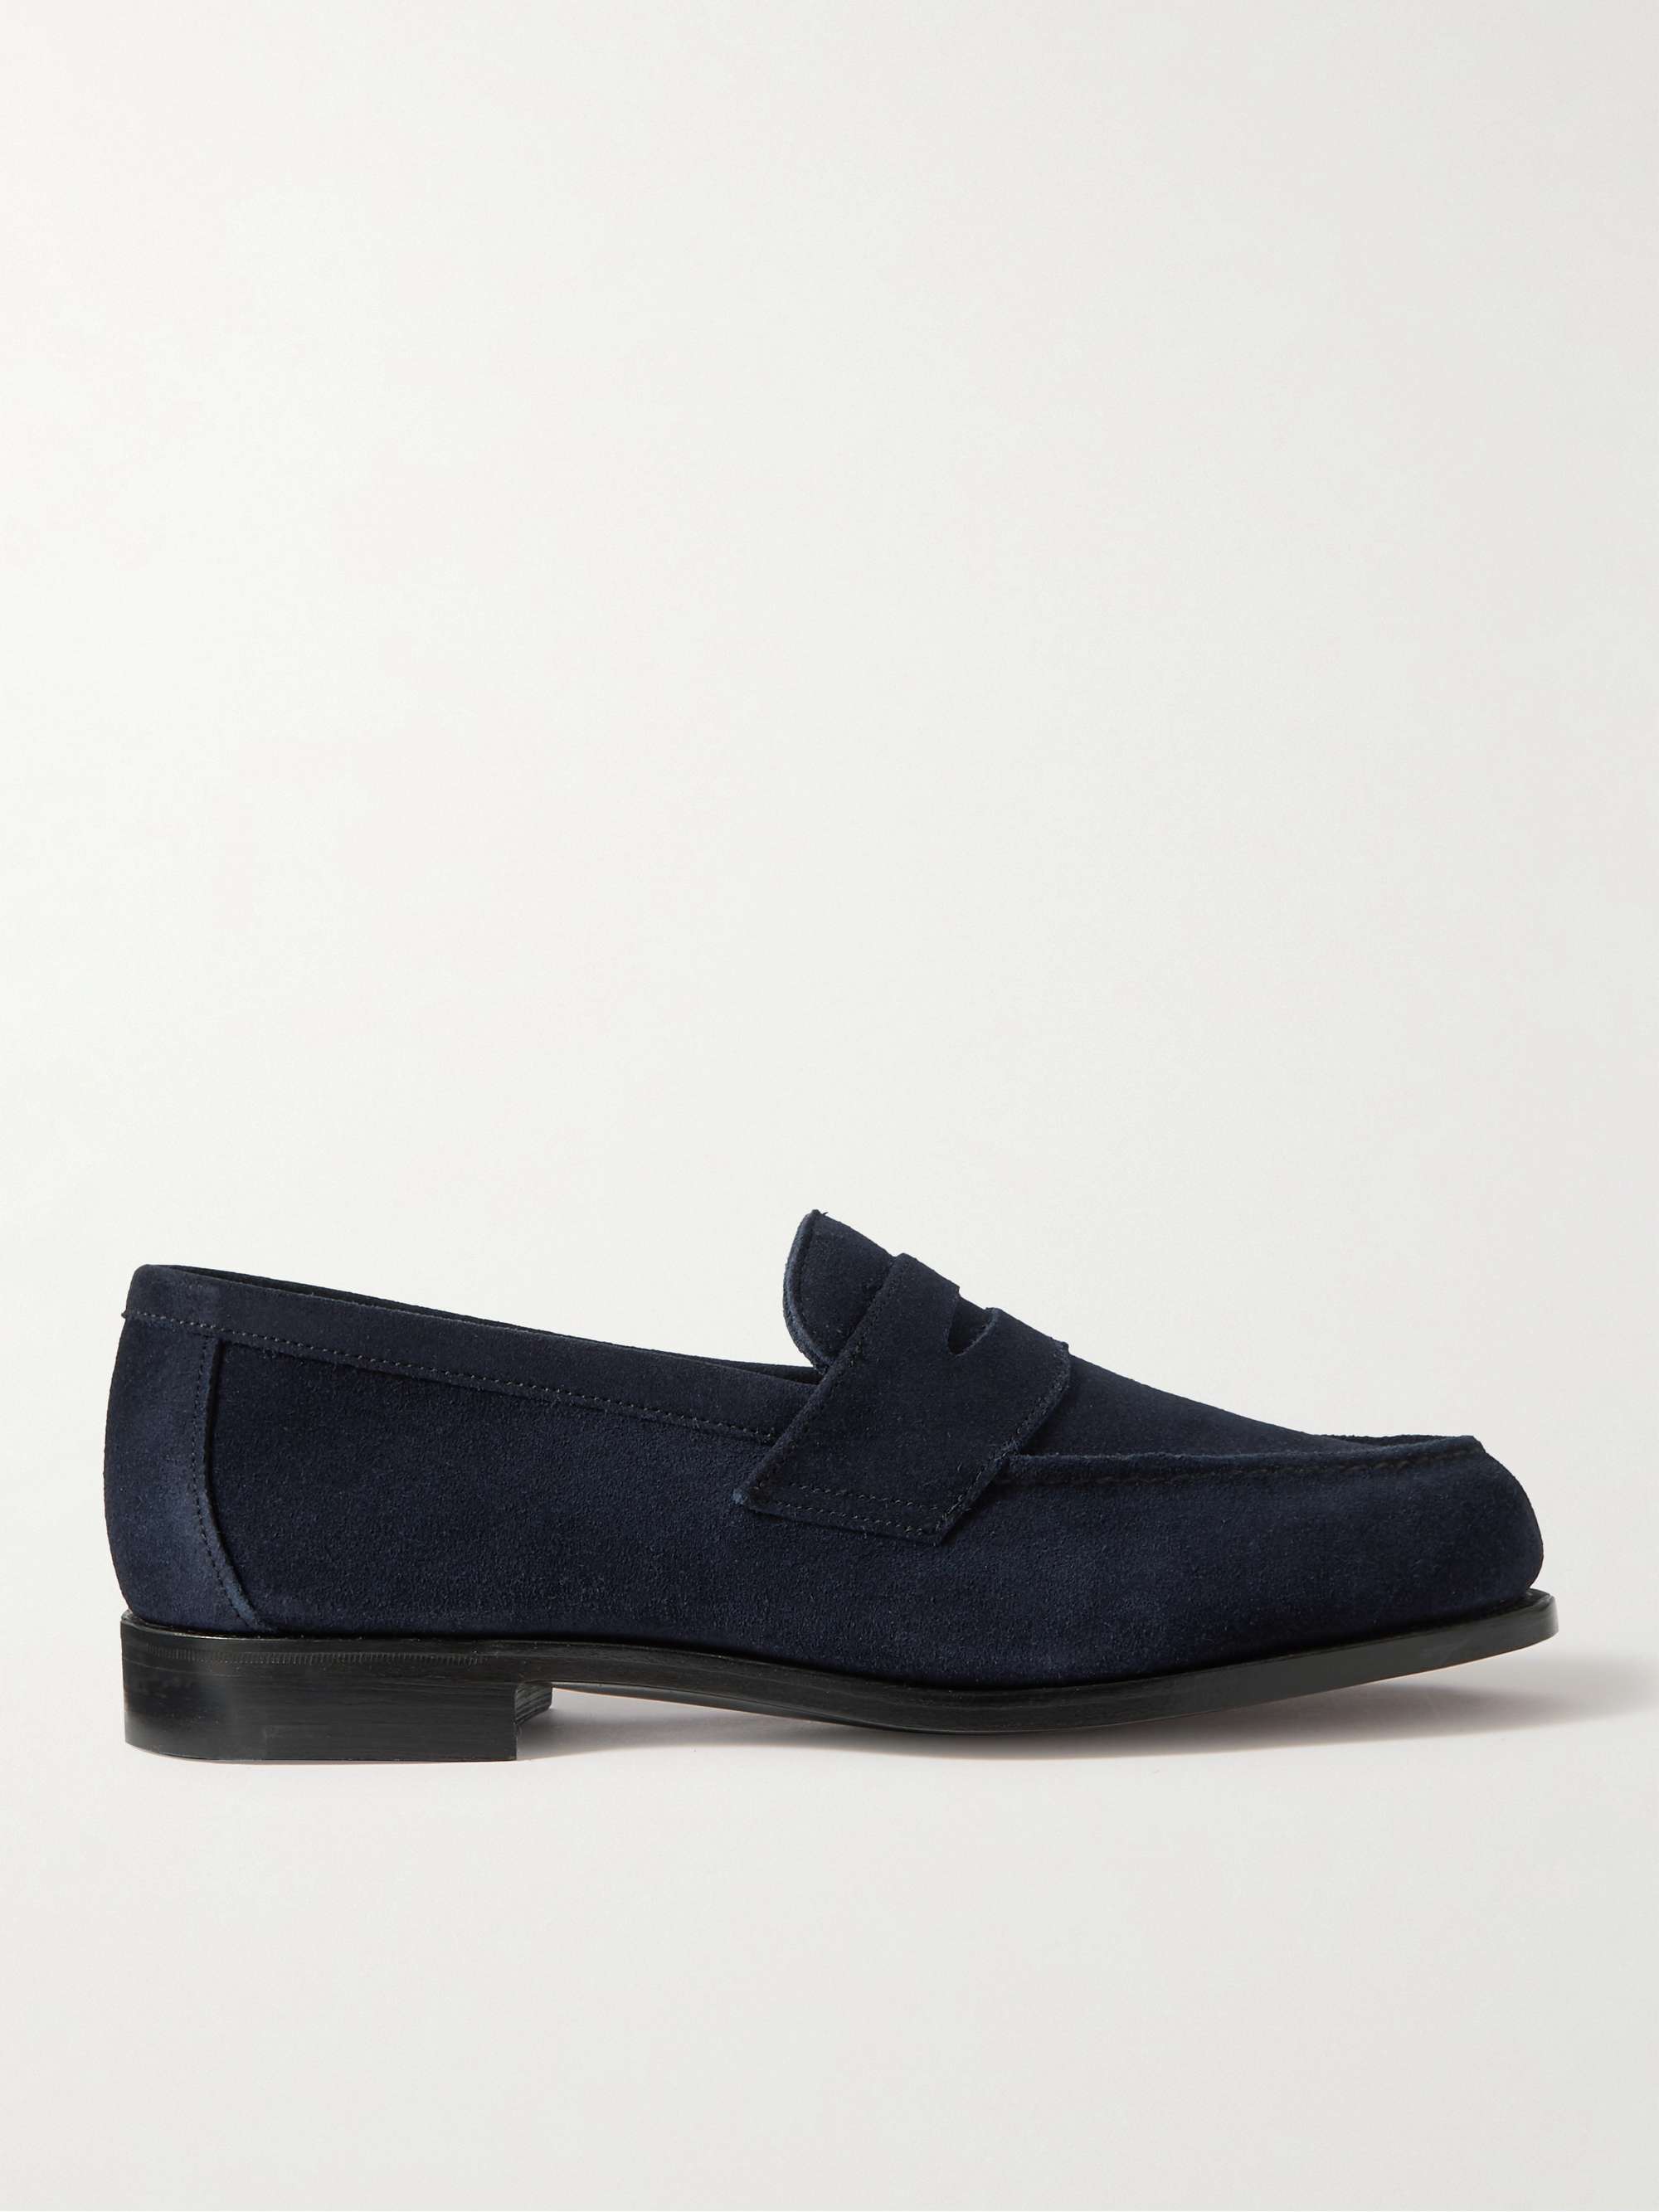 GEORGE CLEVERLEY Cannes Suede Penny Loafers for Men | MR PORTER